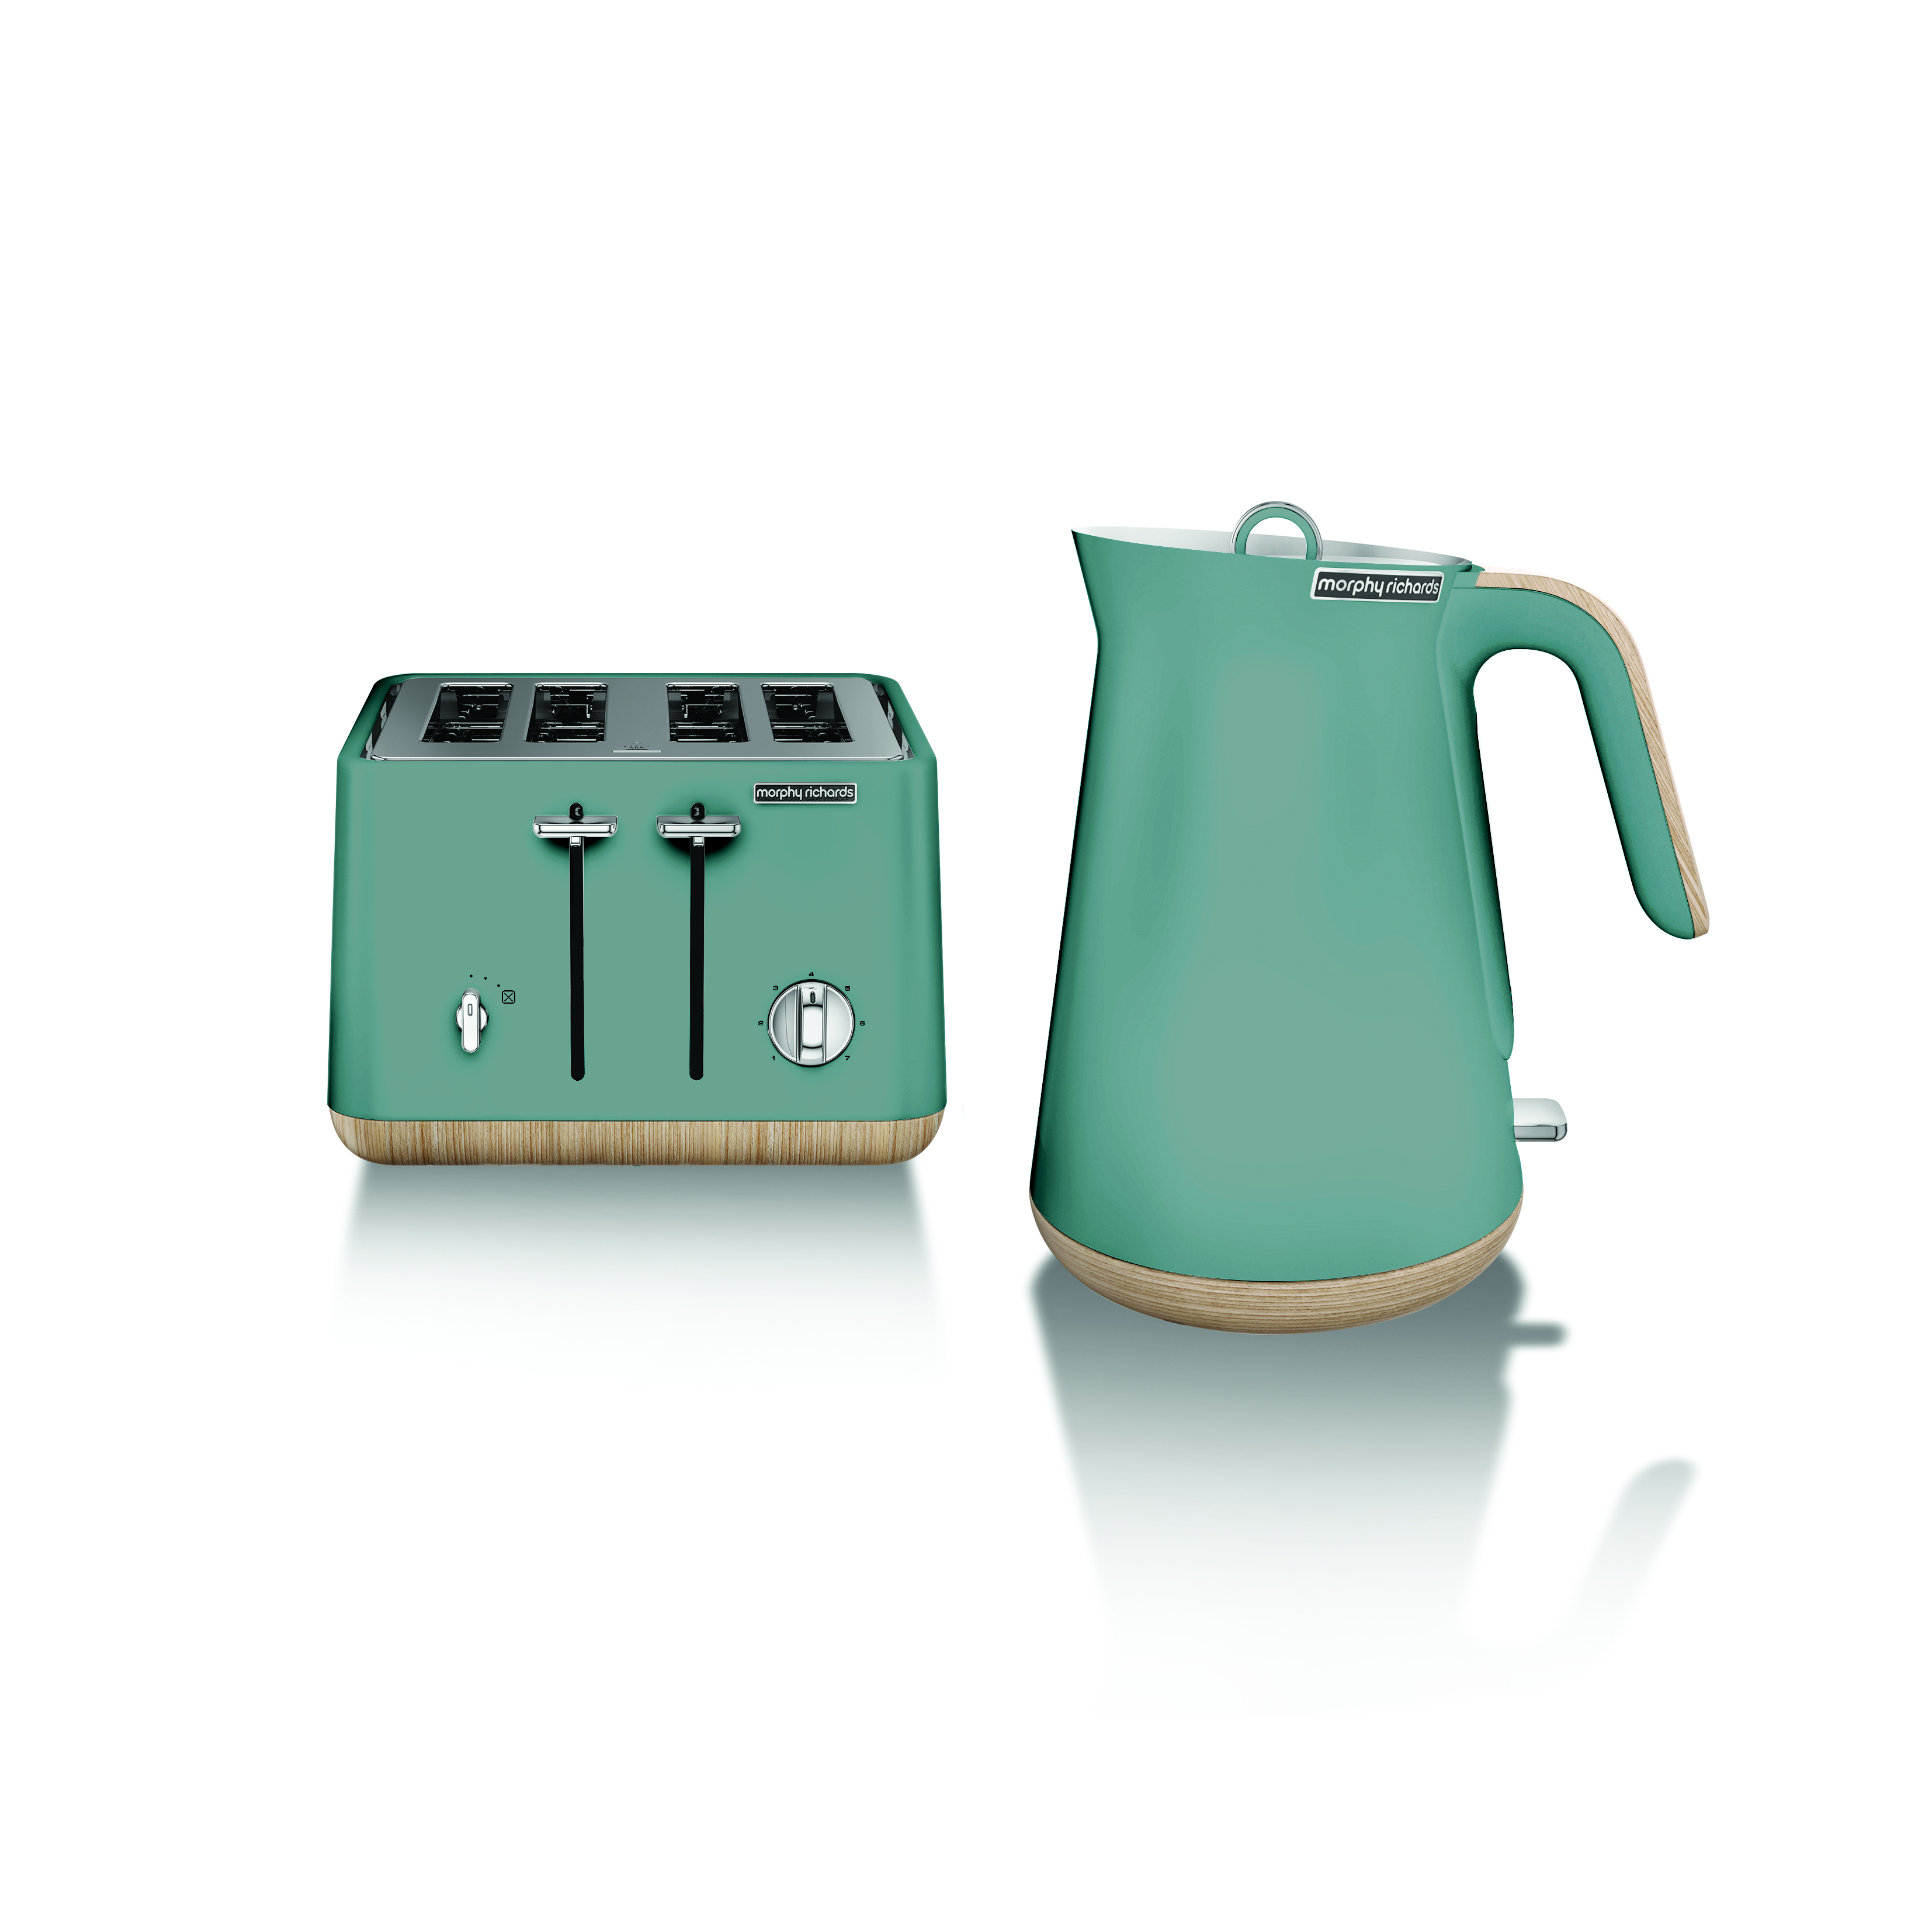 New Teal Toaster & Kettle